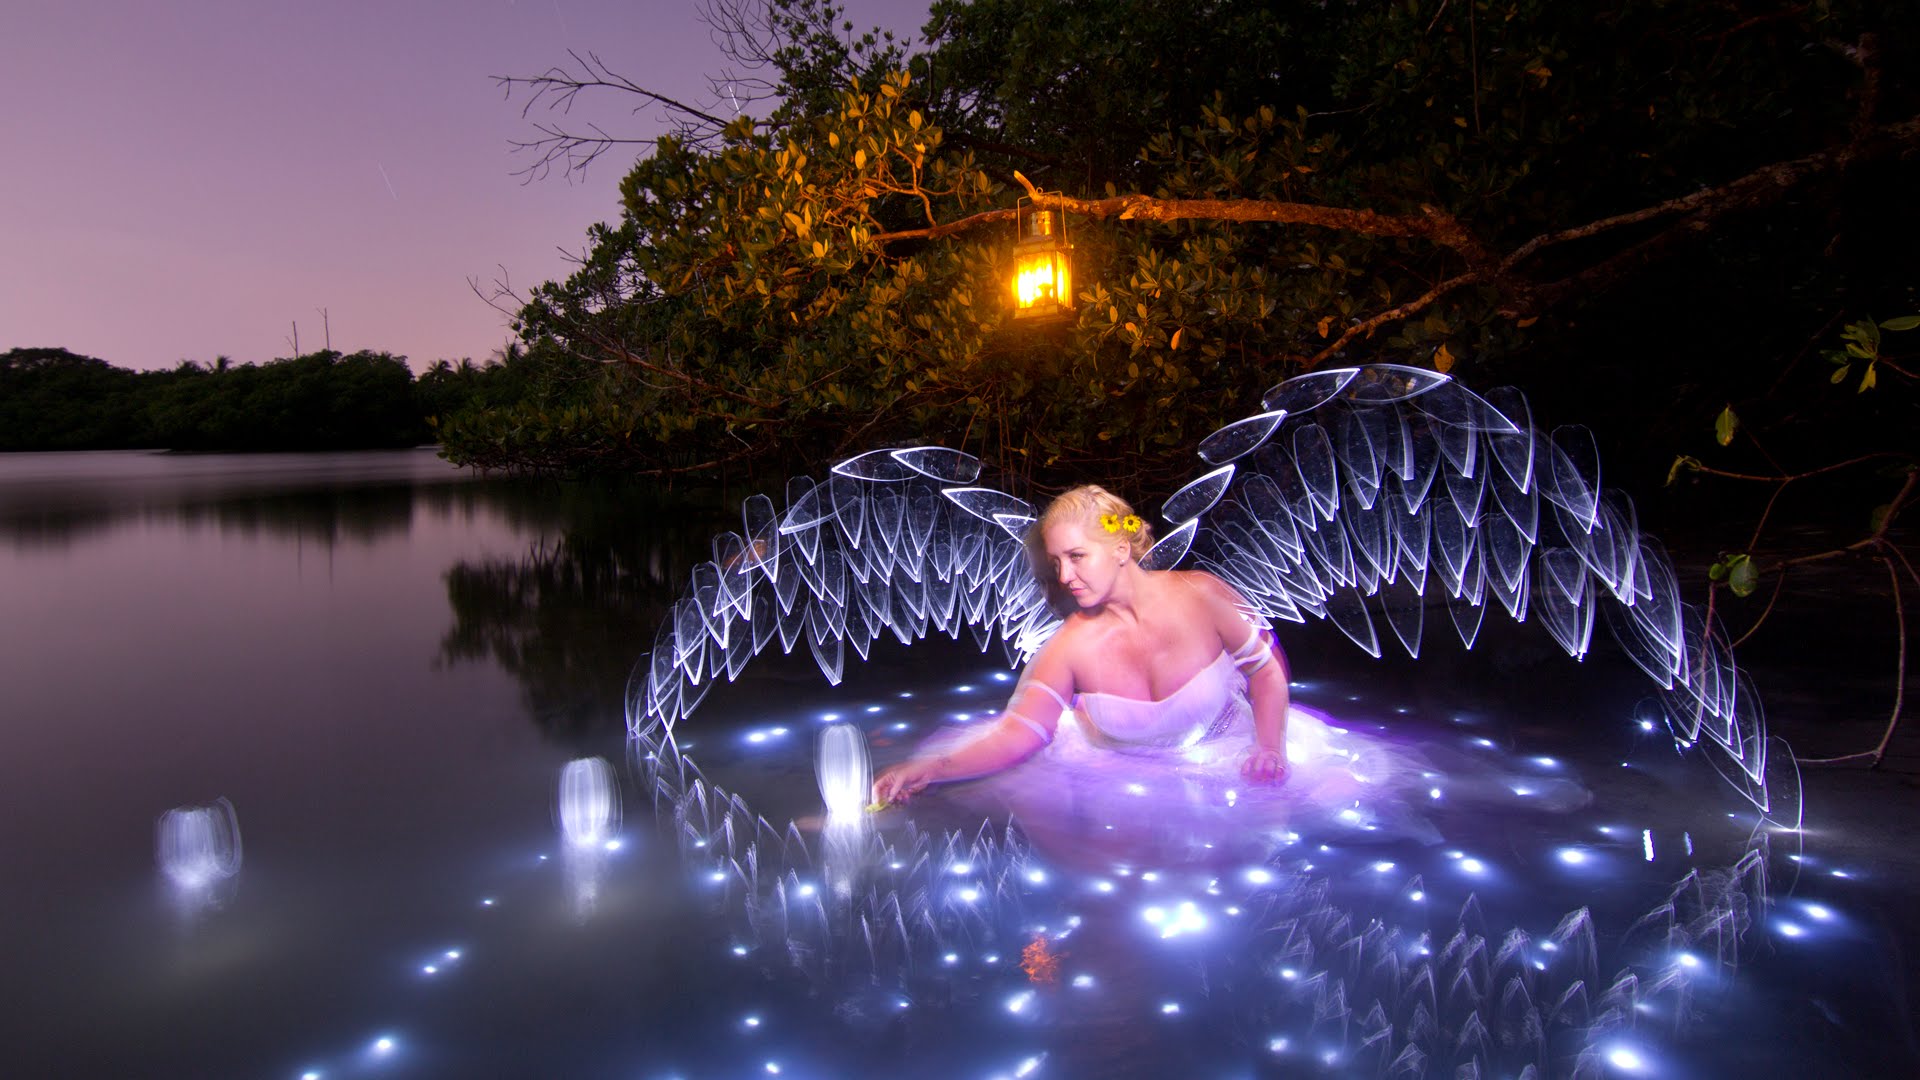 Light Painting Tutorial: How To Light Paint Wings - YouTube